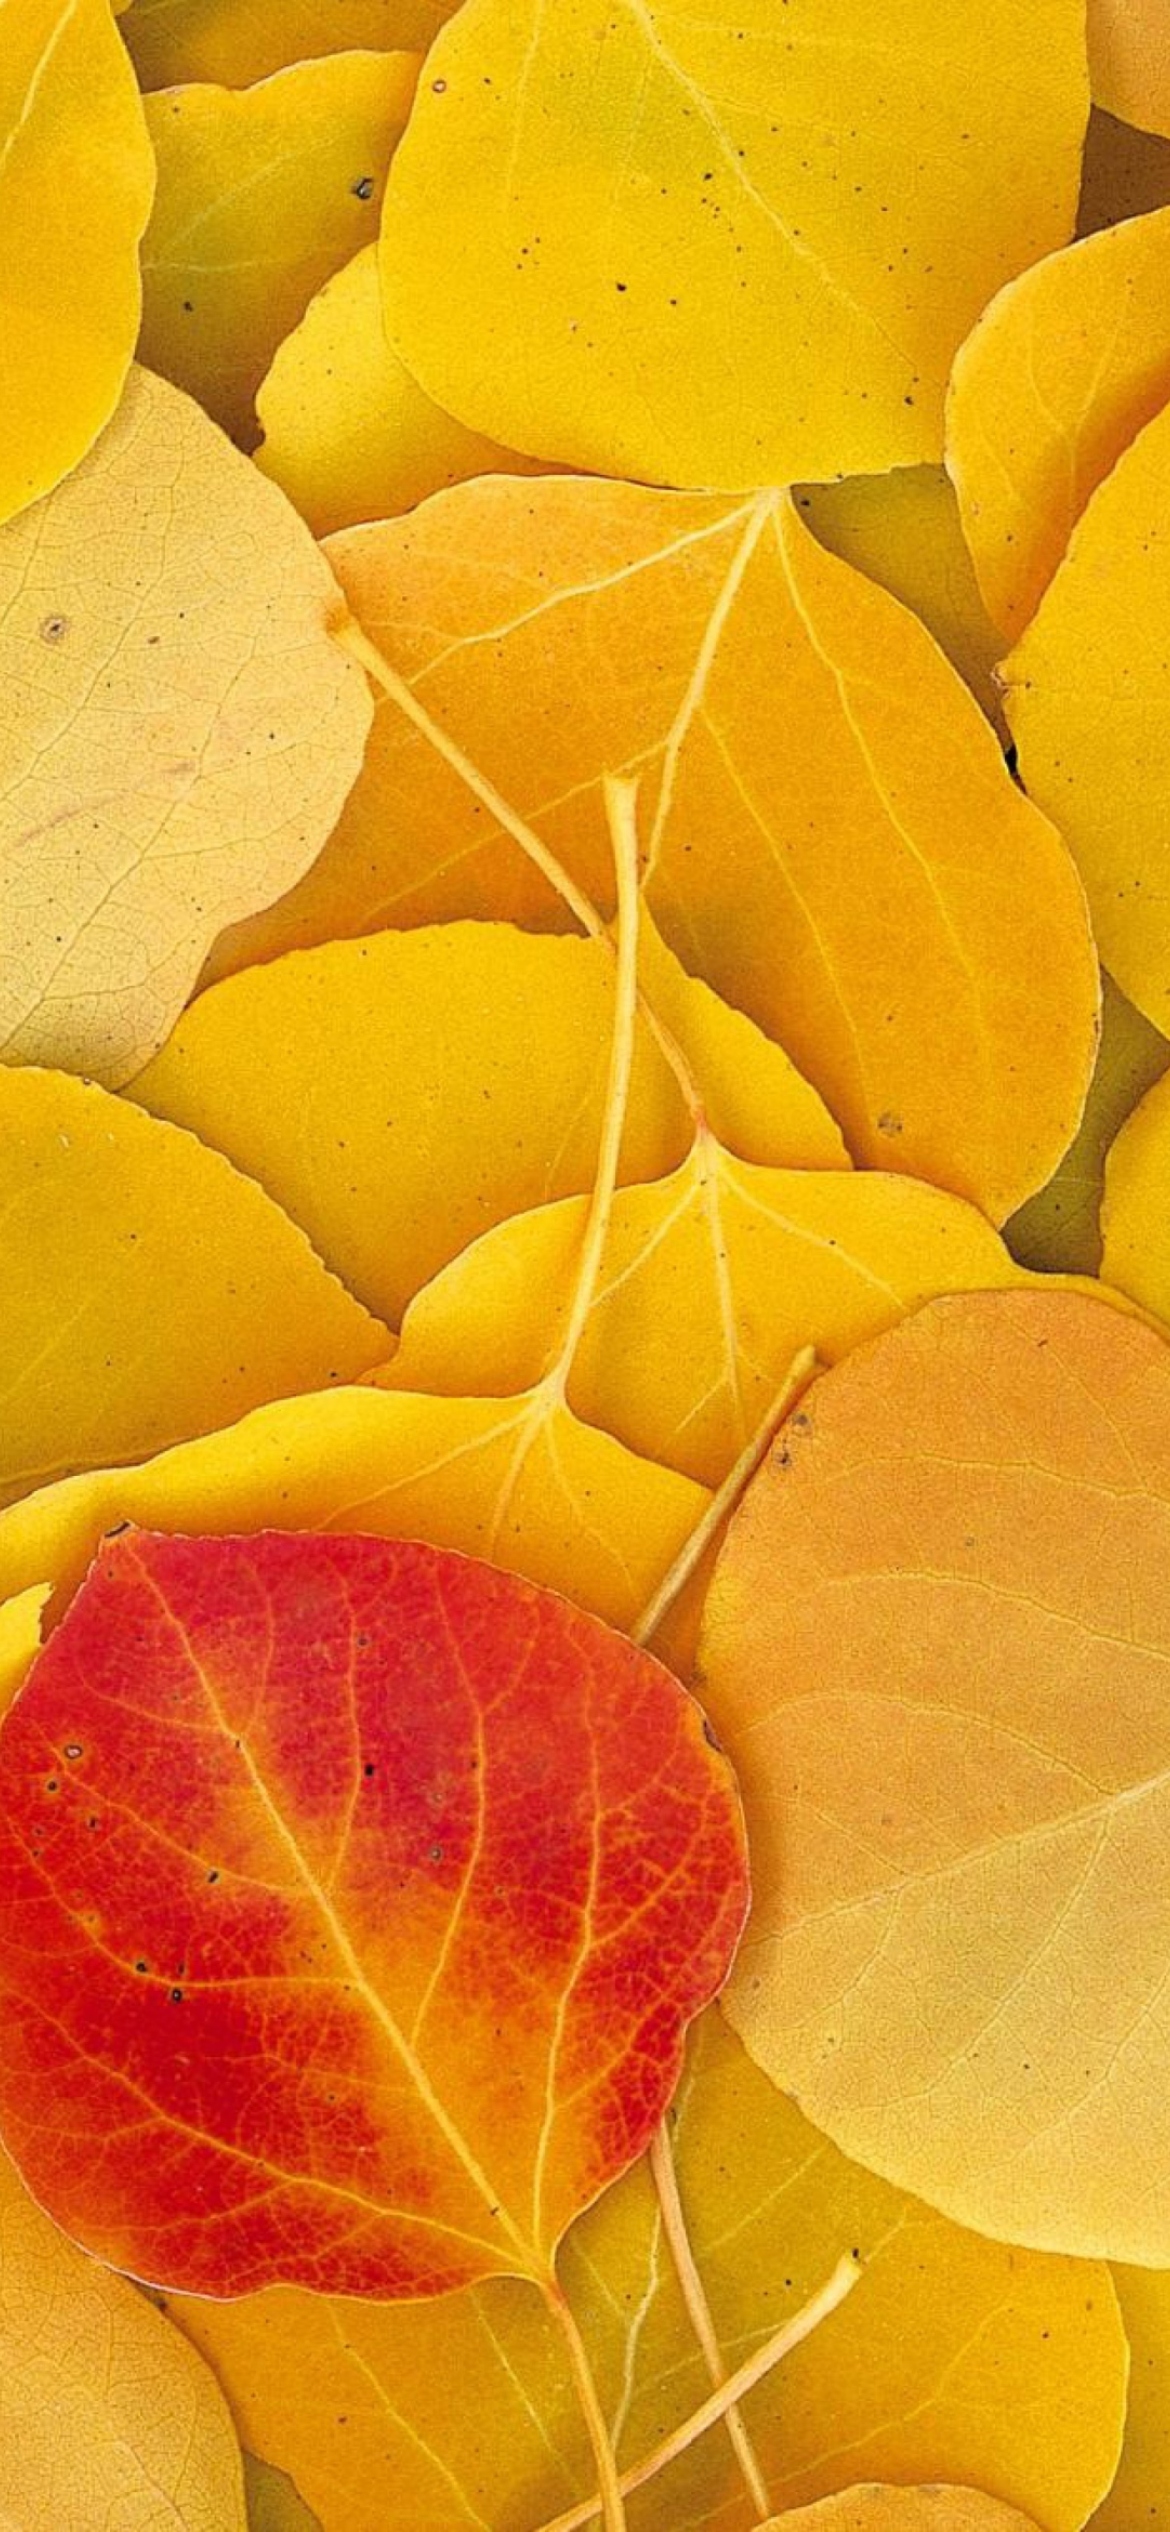 Red Leaf On Yellow Leaves wallpaper 1170x2532